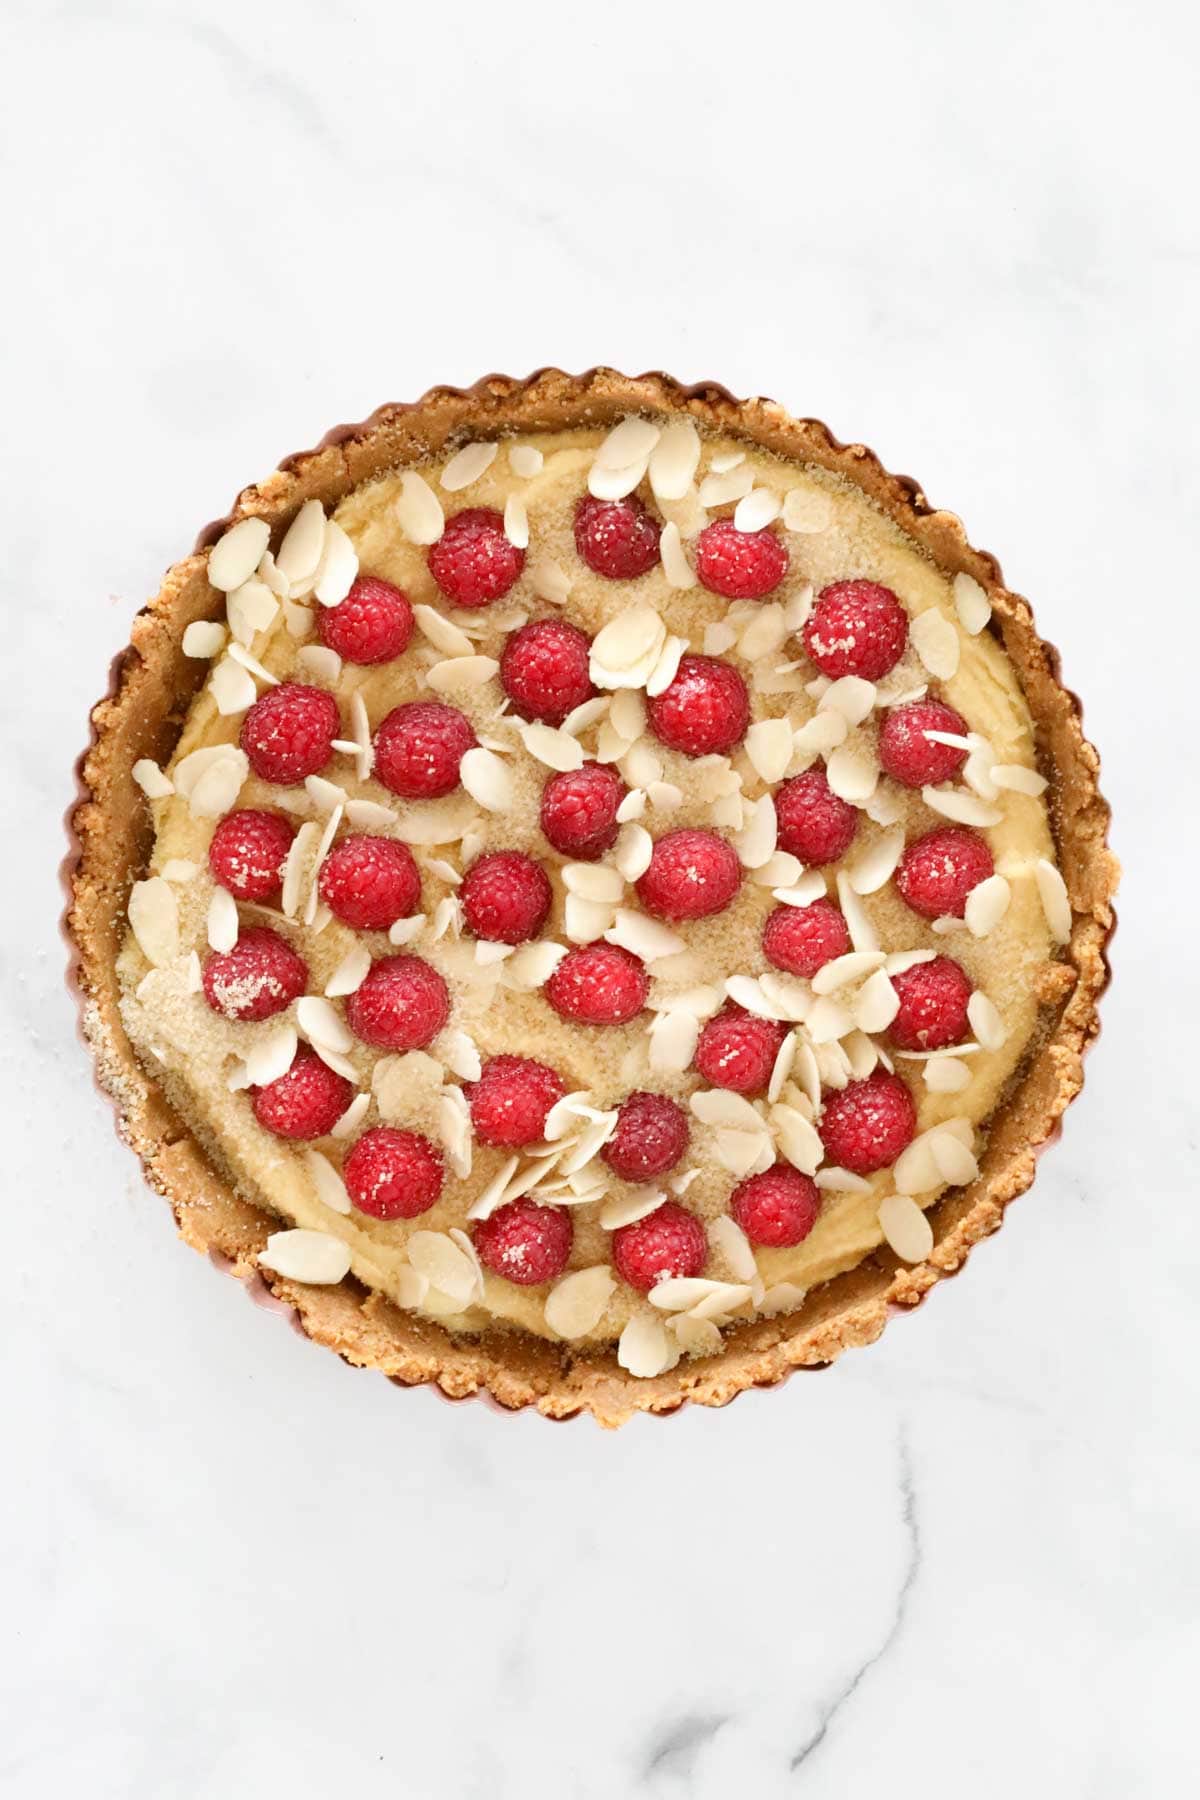 Raspberries pressed lightly into almond cream, and flaked almonds sprinkled over the top.